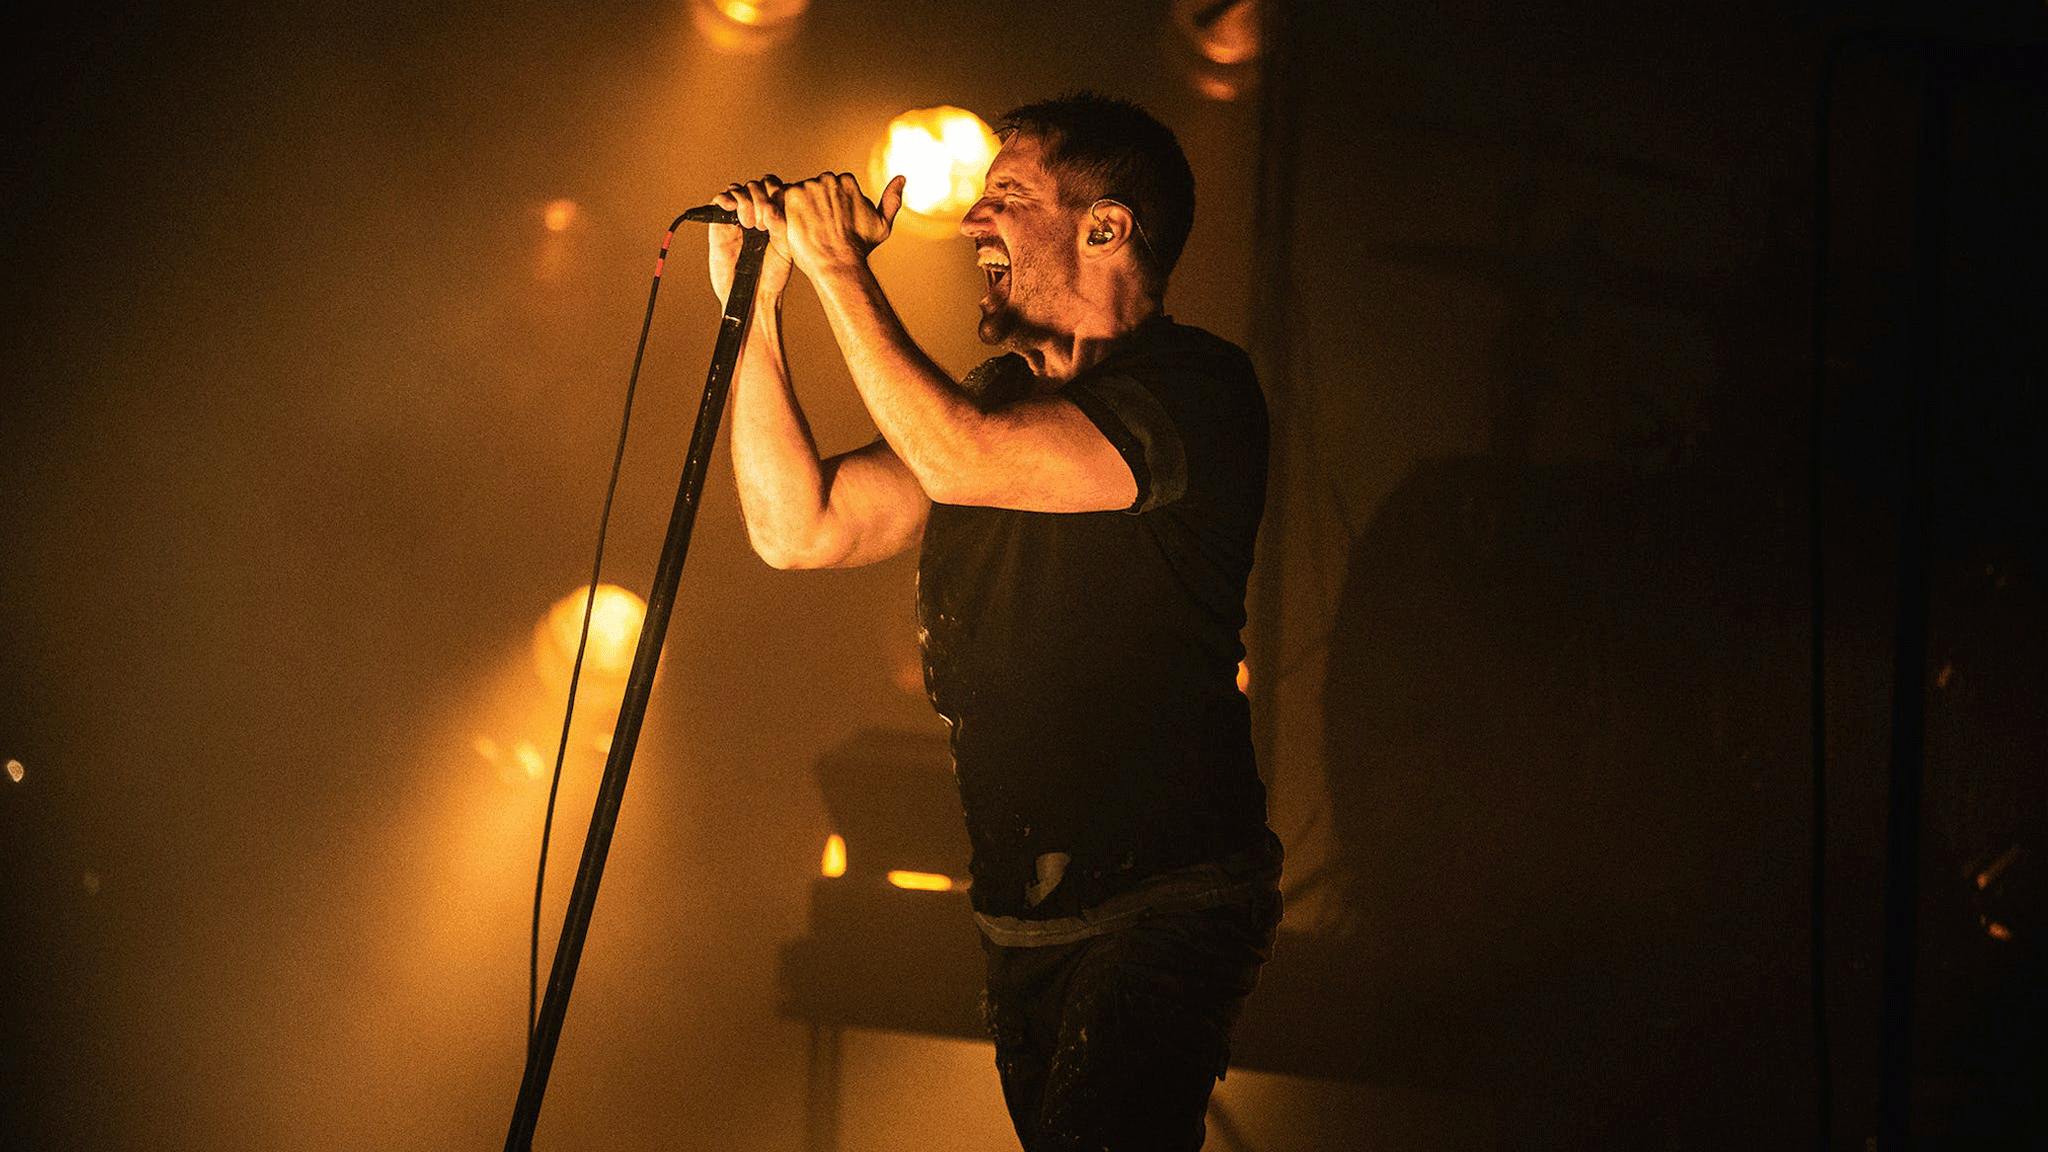 Trent Reznor doesn’t seem to be interested in releasing new Nine Inch Nails music right now